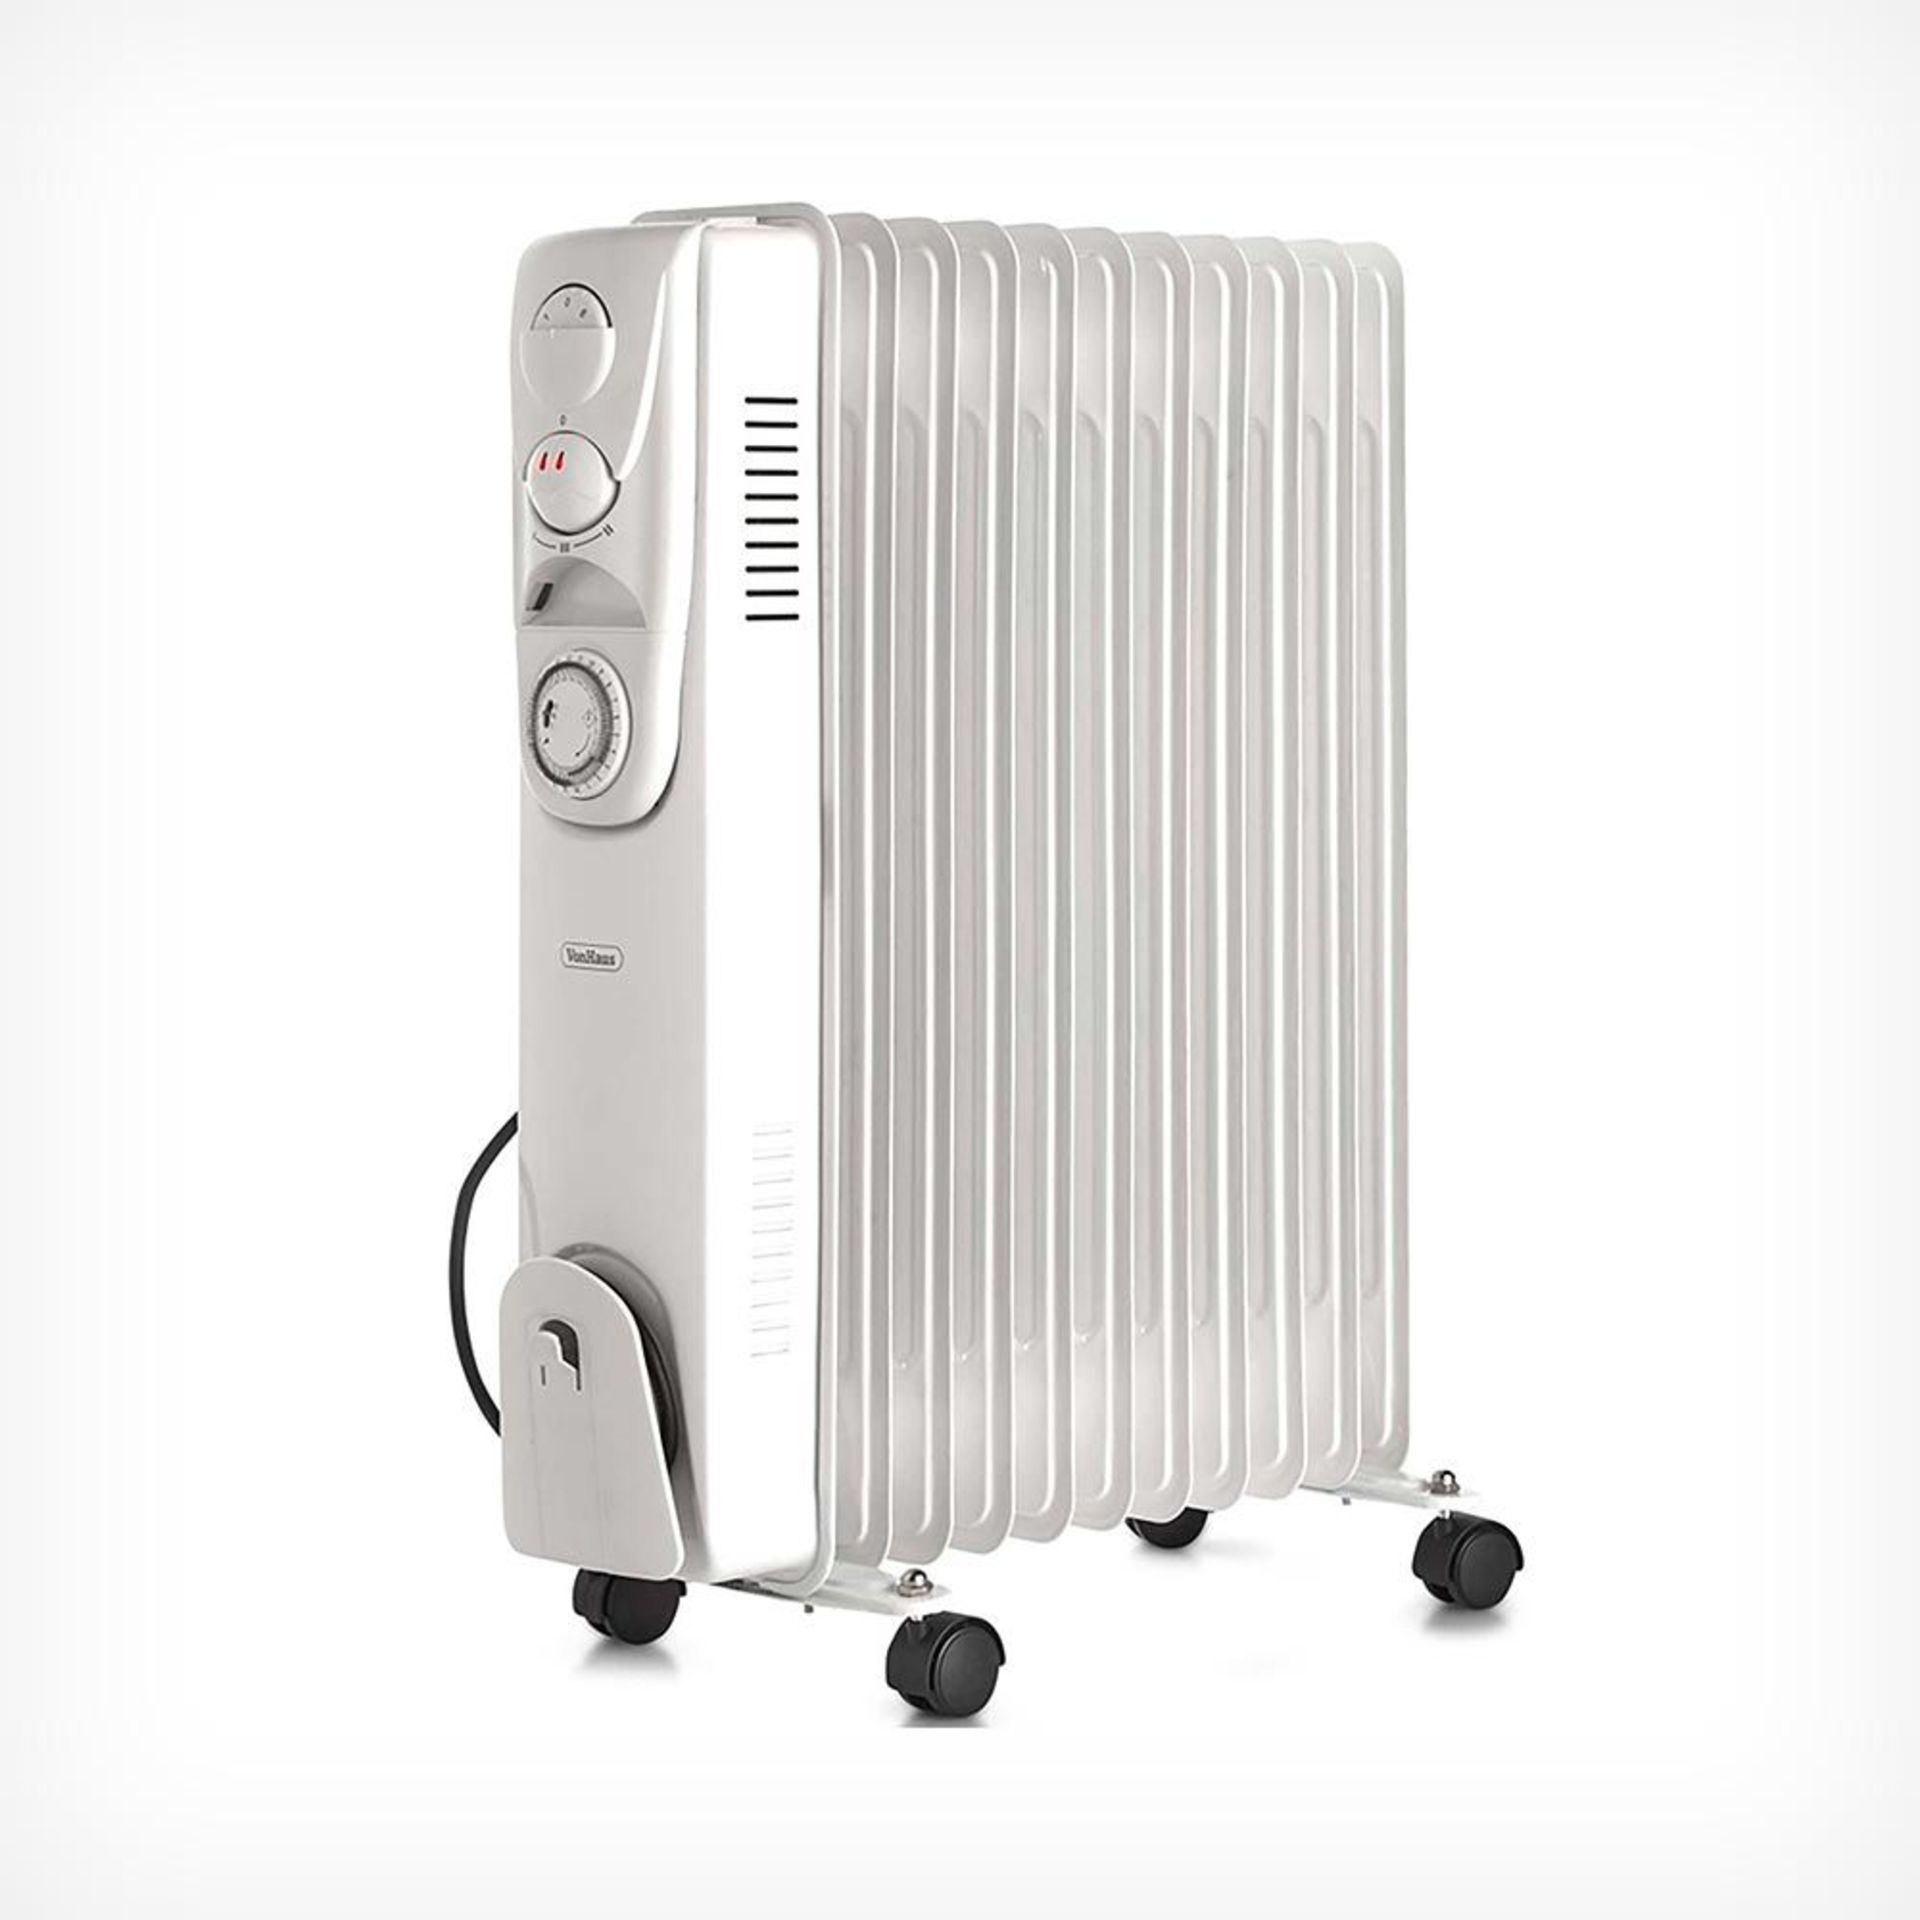 (G52) 11 Fin 2500W Oil Filled Radiator - White Suitable for areas up to 28 square metres 3 po... - Image 2 of 3